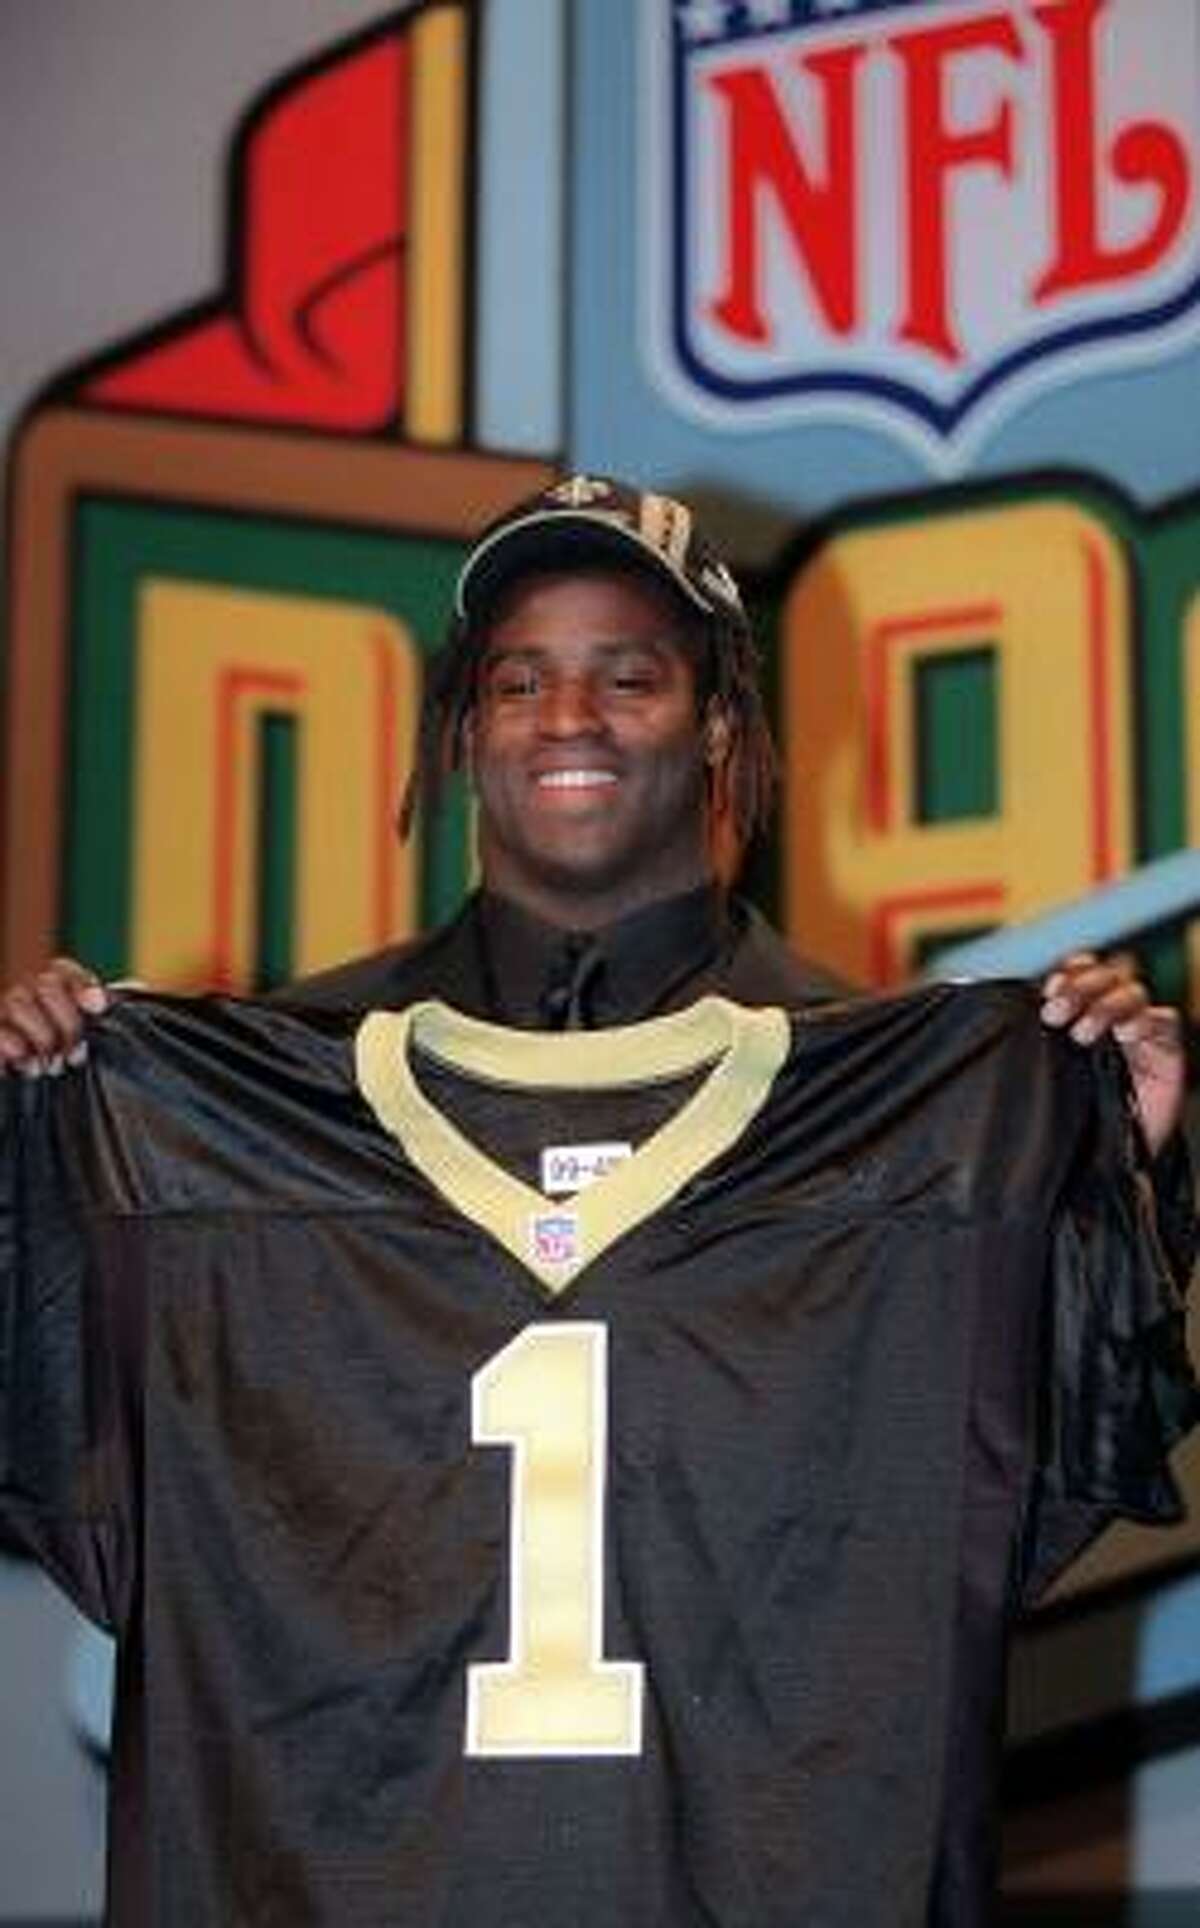 1999: Williams was selected fifth overall in that year's NFL draft by the New Orleans Saints.